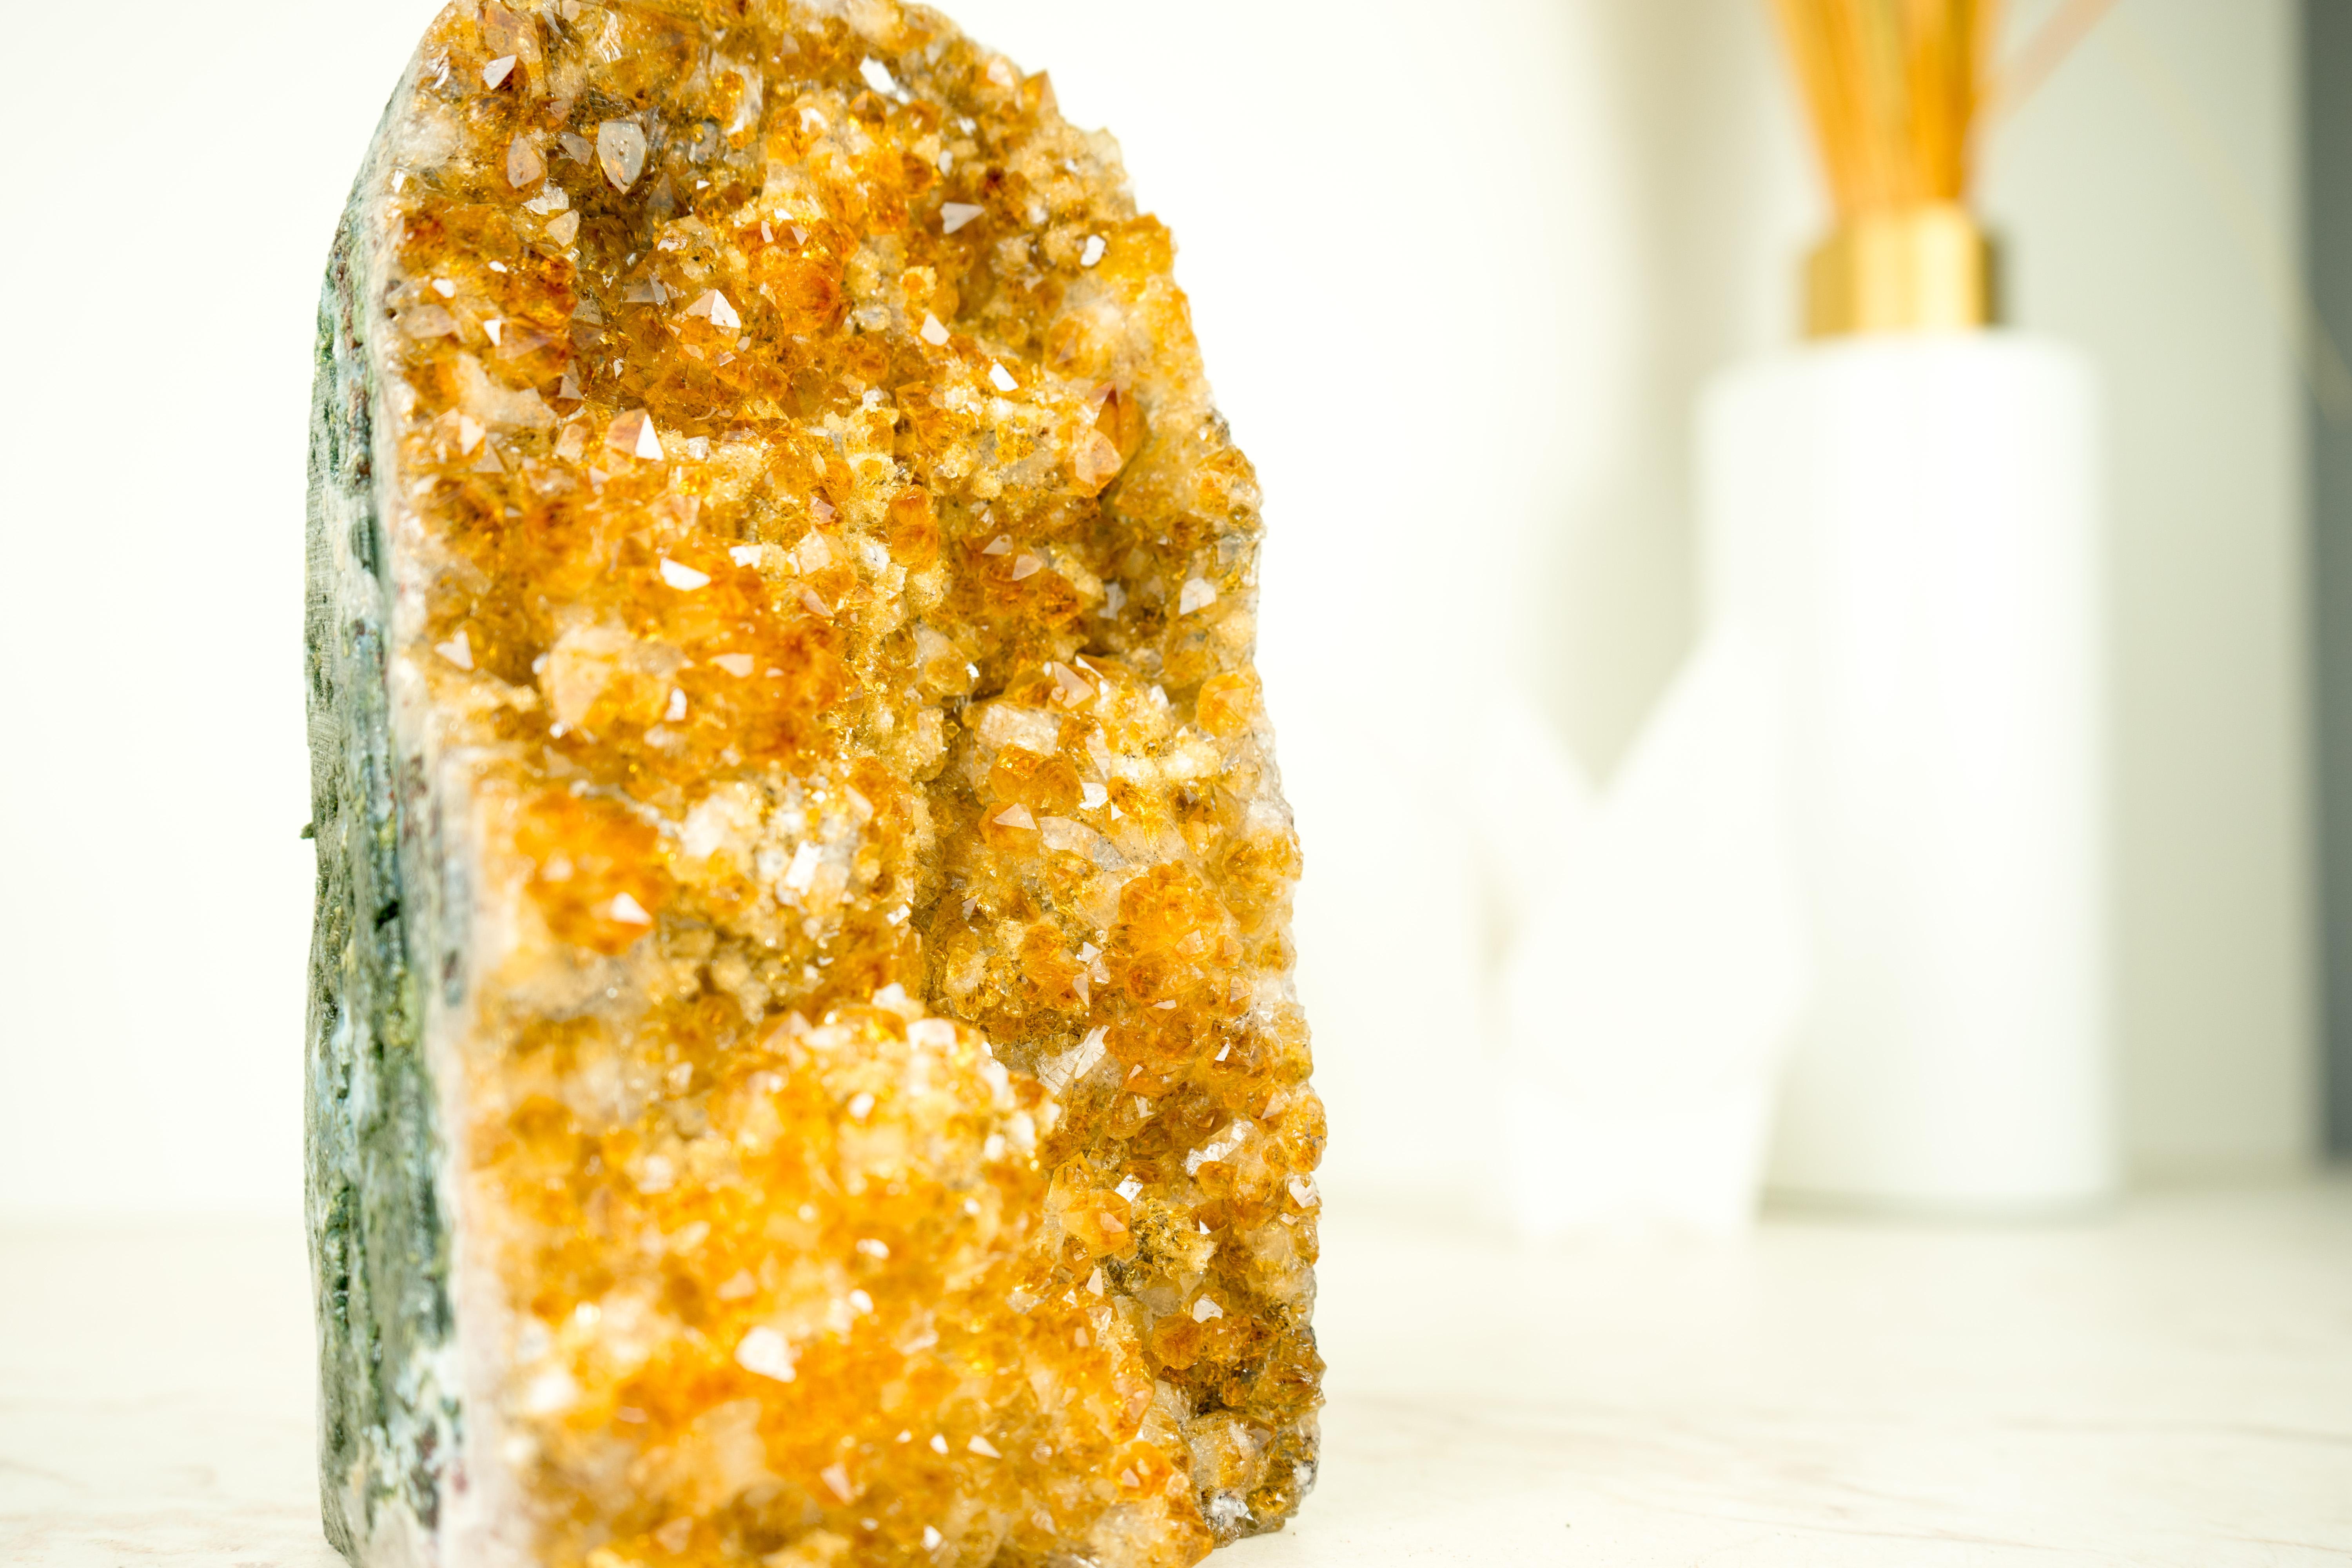 Small Citrine Cluster with Galaxy Druzy, The Perfect Energetic Accent Crystal

▫️ Description

A Small Premium Citrine Cluster brings world-class color, a rare Galaxy Druzy covering the whole specimen and gorgeous aesthetics. This stunning crystal